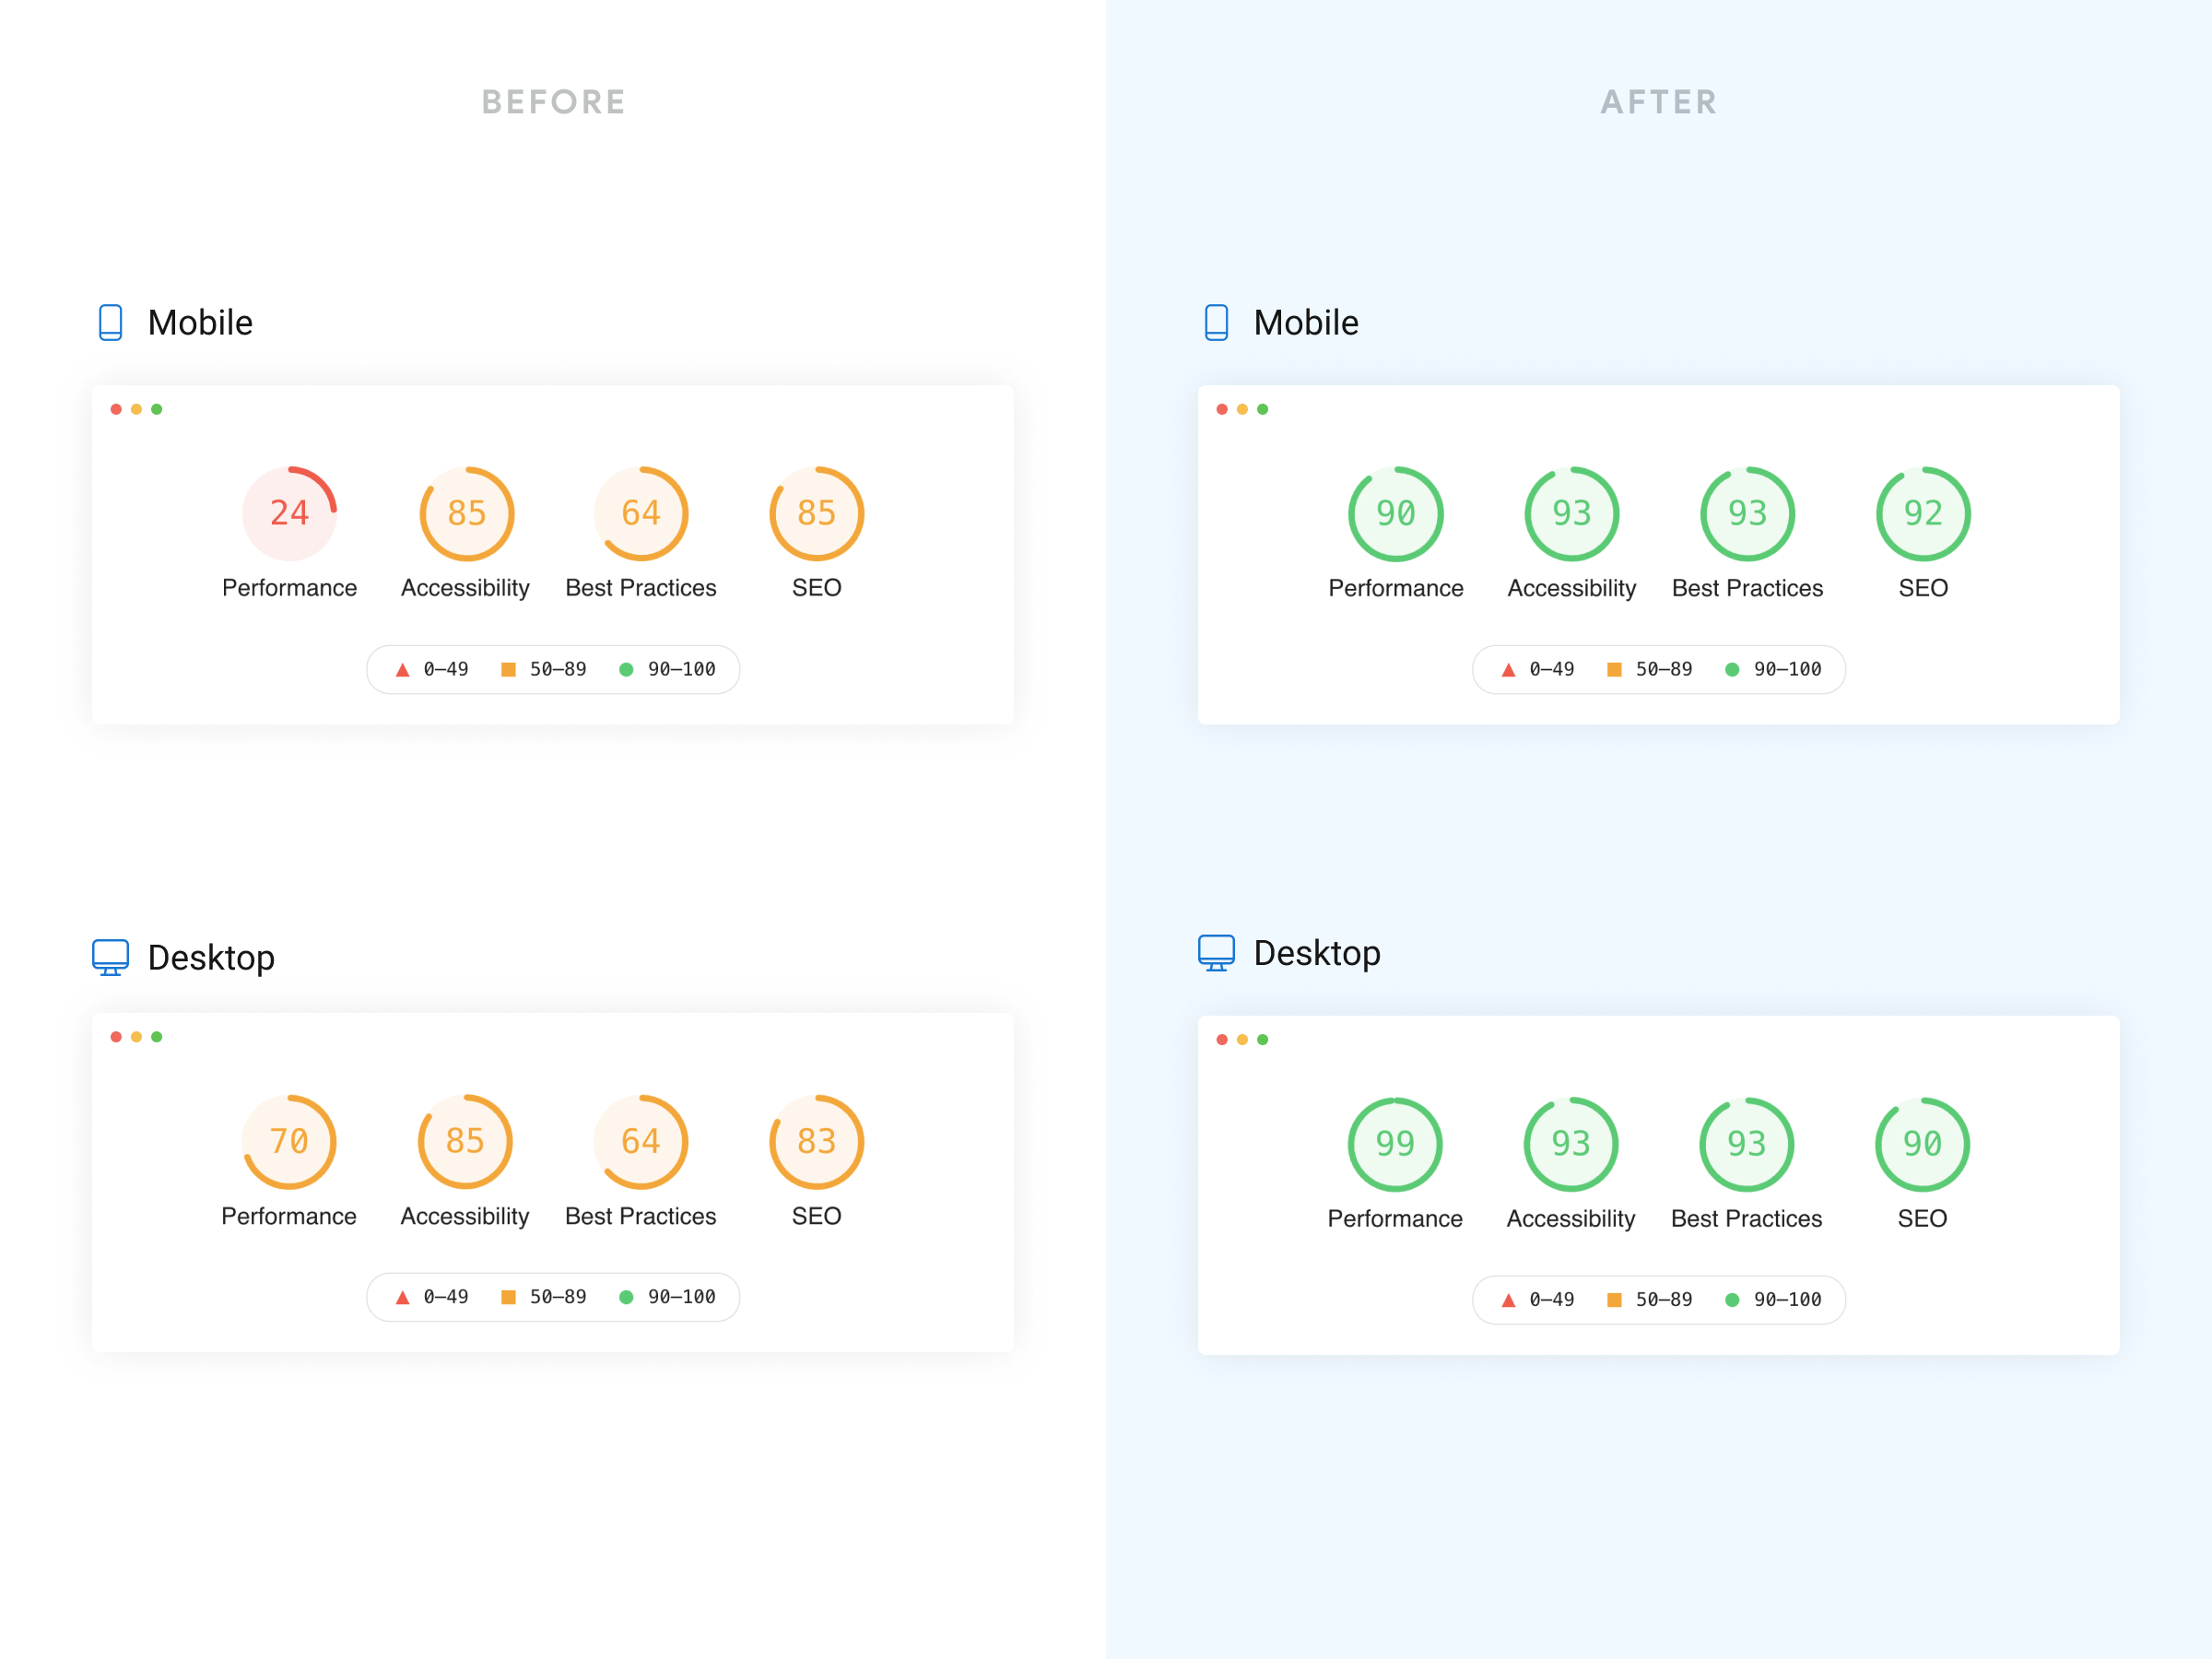 Before and after comparison of web performance metrics for both mobile and desktop views